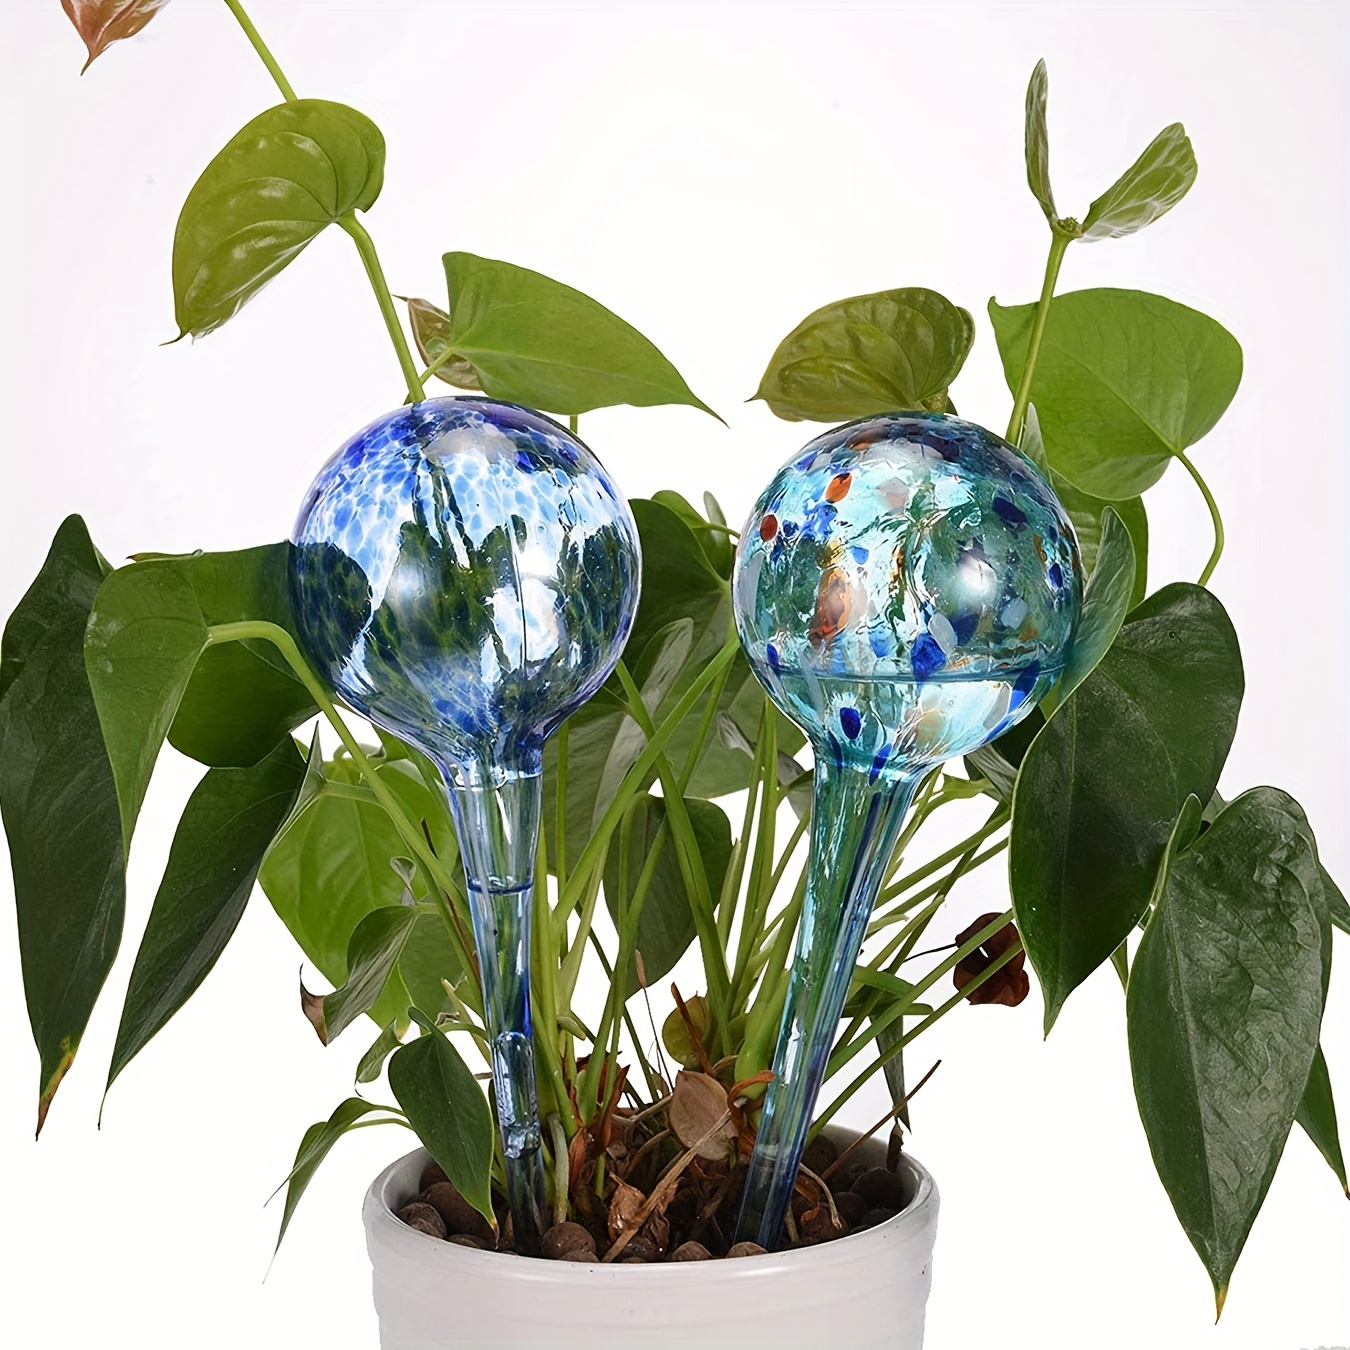 

Upgrade Your Garden With These Colorful Automatic Plant Watering Globes - Perfect For Indoor & Outdoor Use!